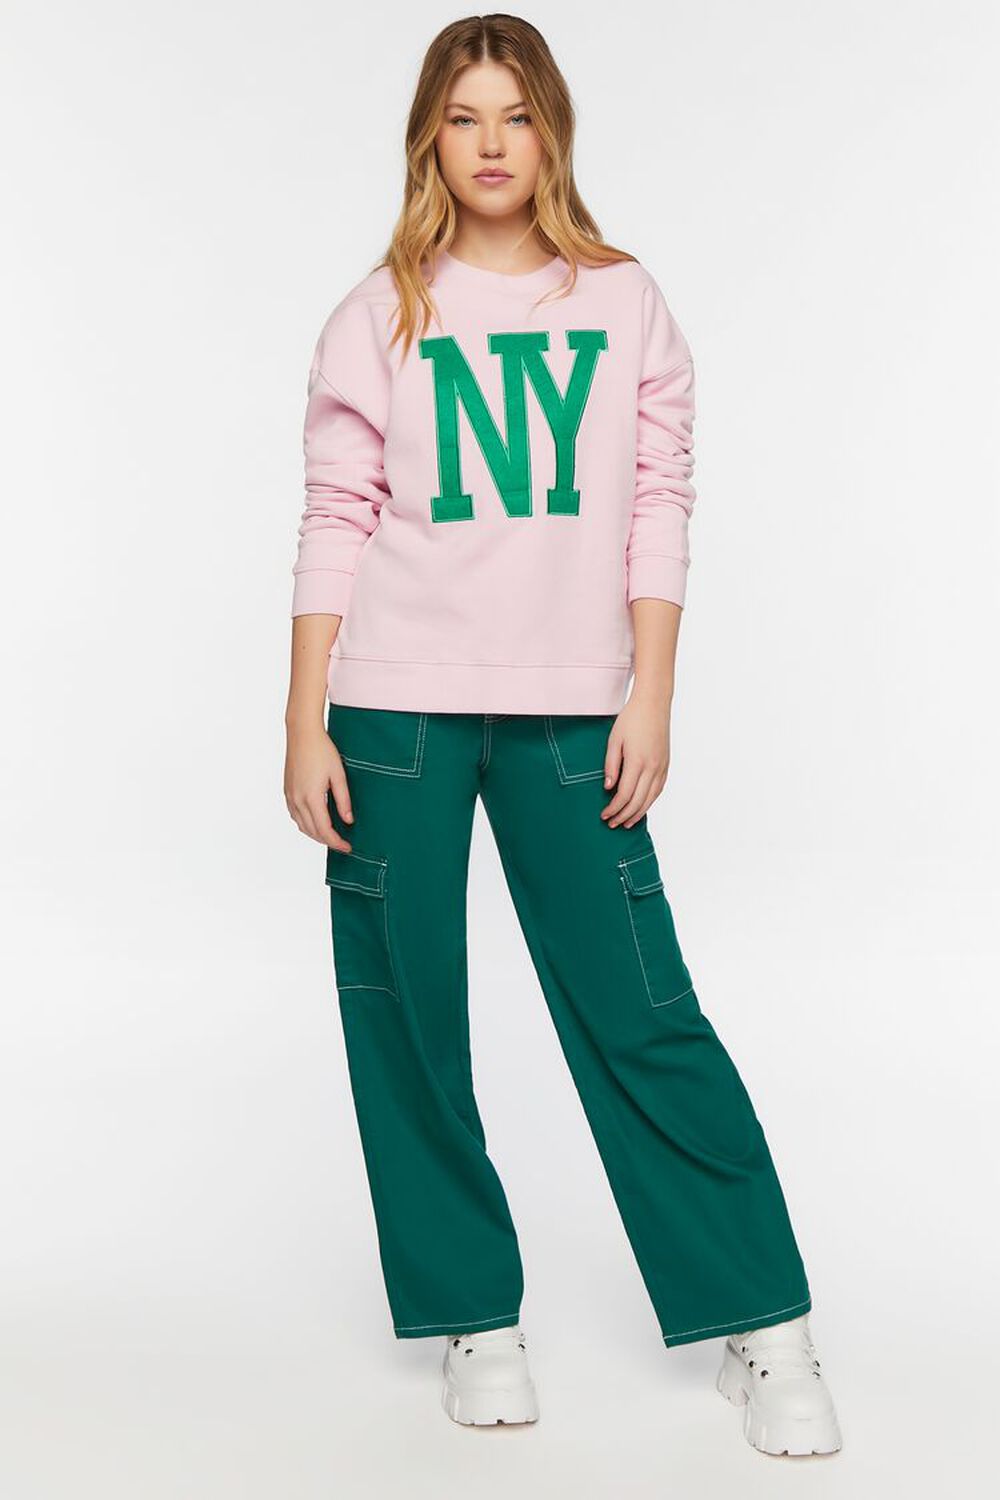 NY Embroidered Pullover